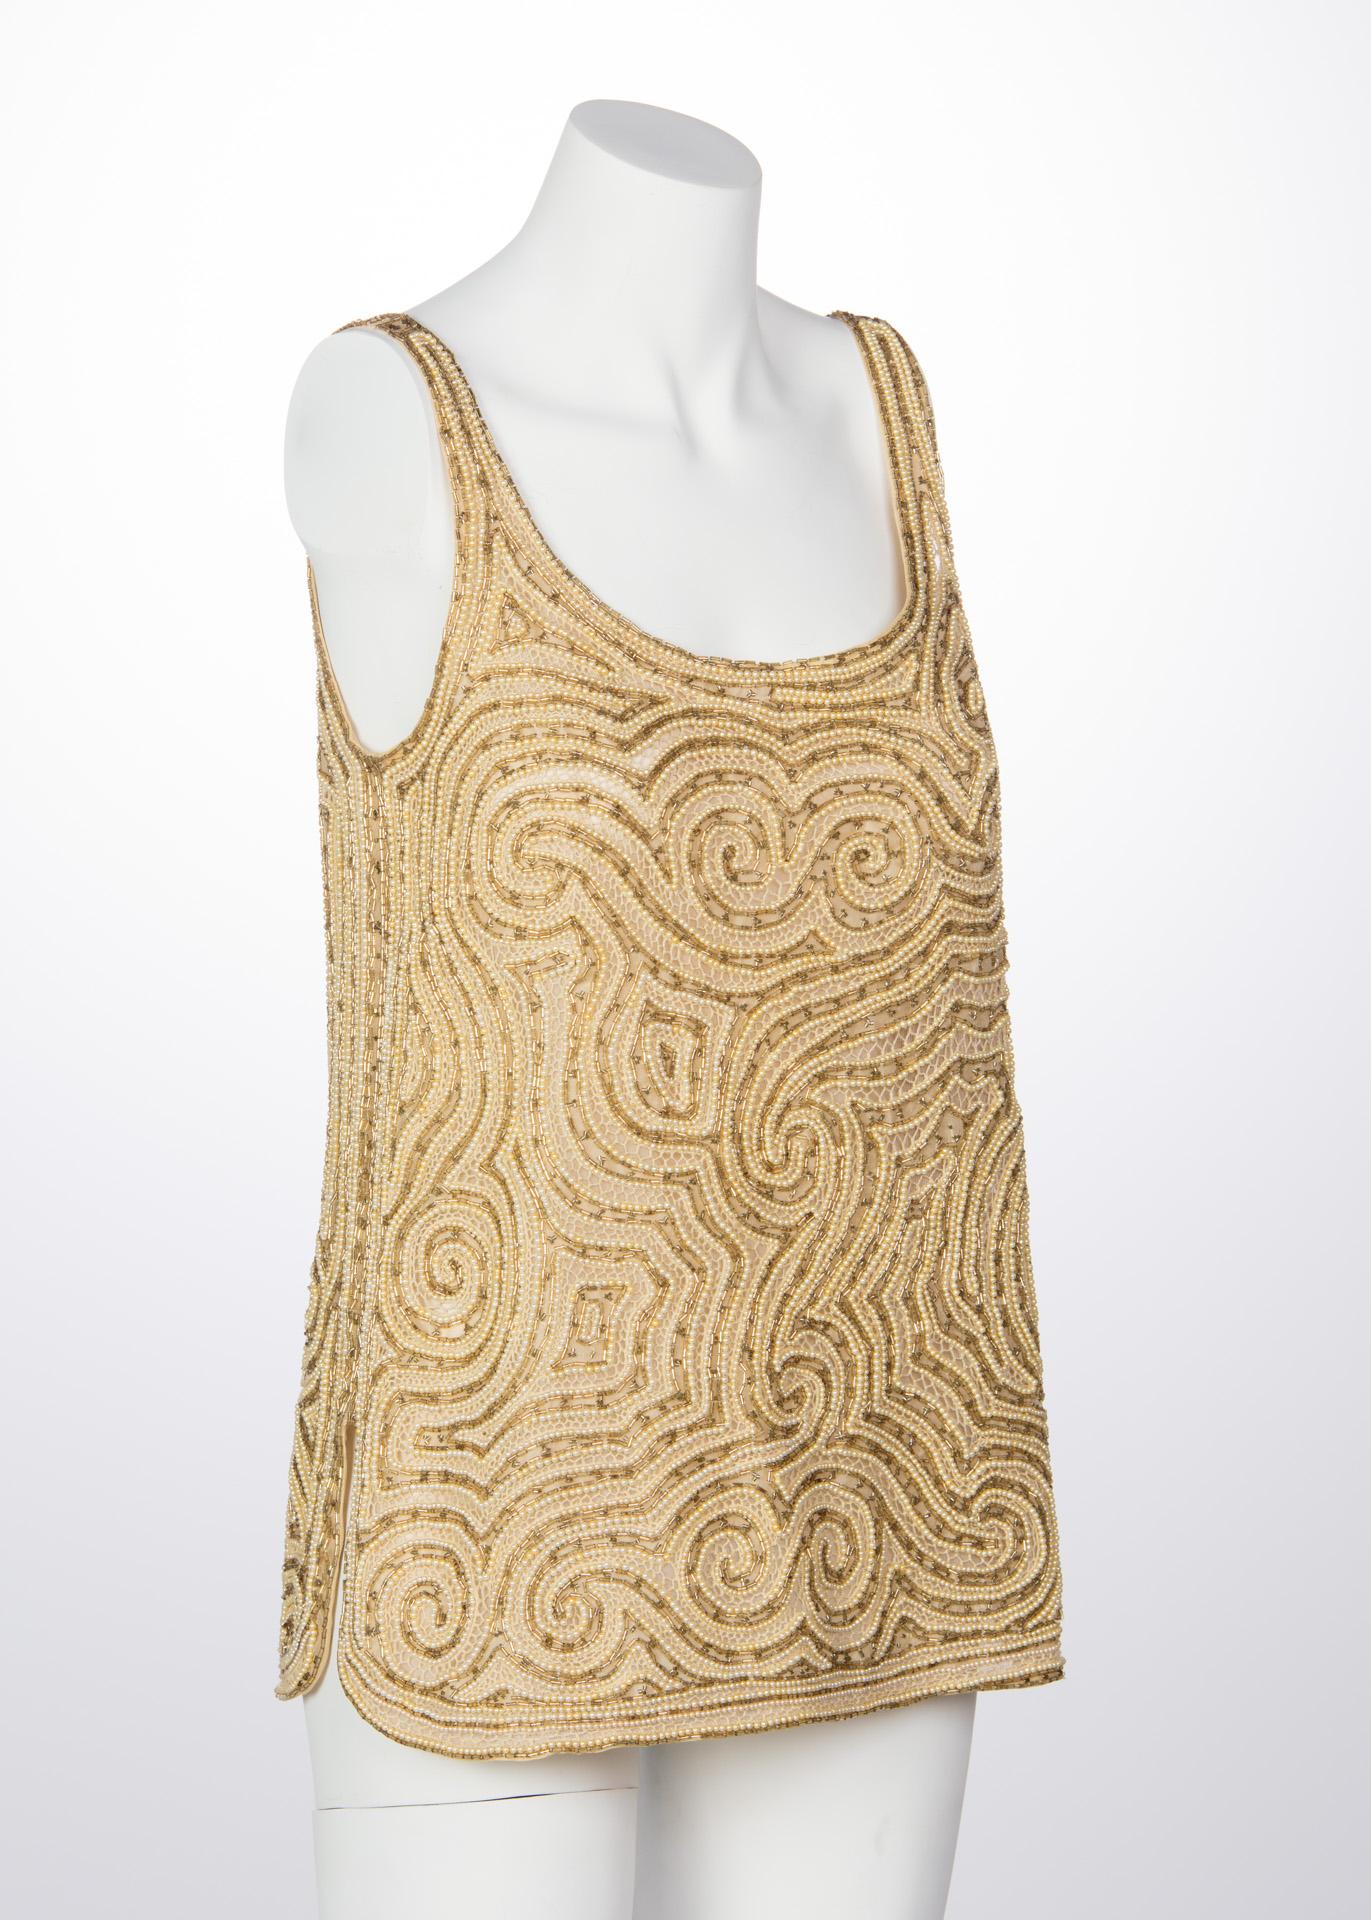 Halston, according to some, invented the American look. With many of innovations in fabrications, Halston’s appeal is in the elegance of simplicity. Reflected in this 1970s vintage tunic, Halton designs tend to boast a demure silhouette and an